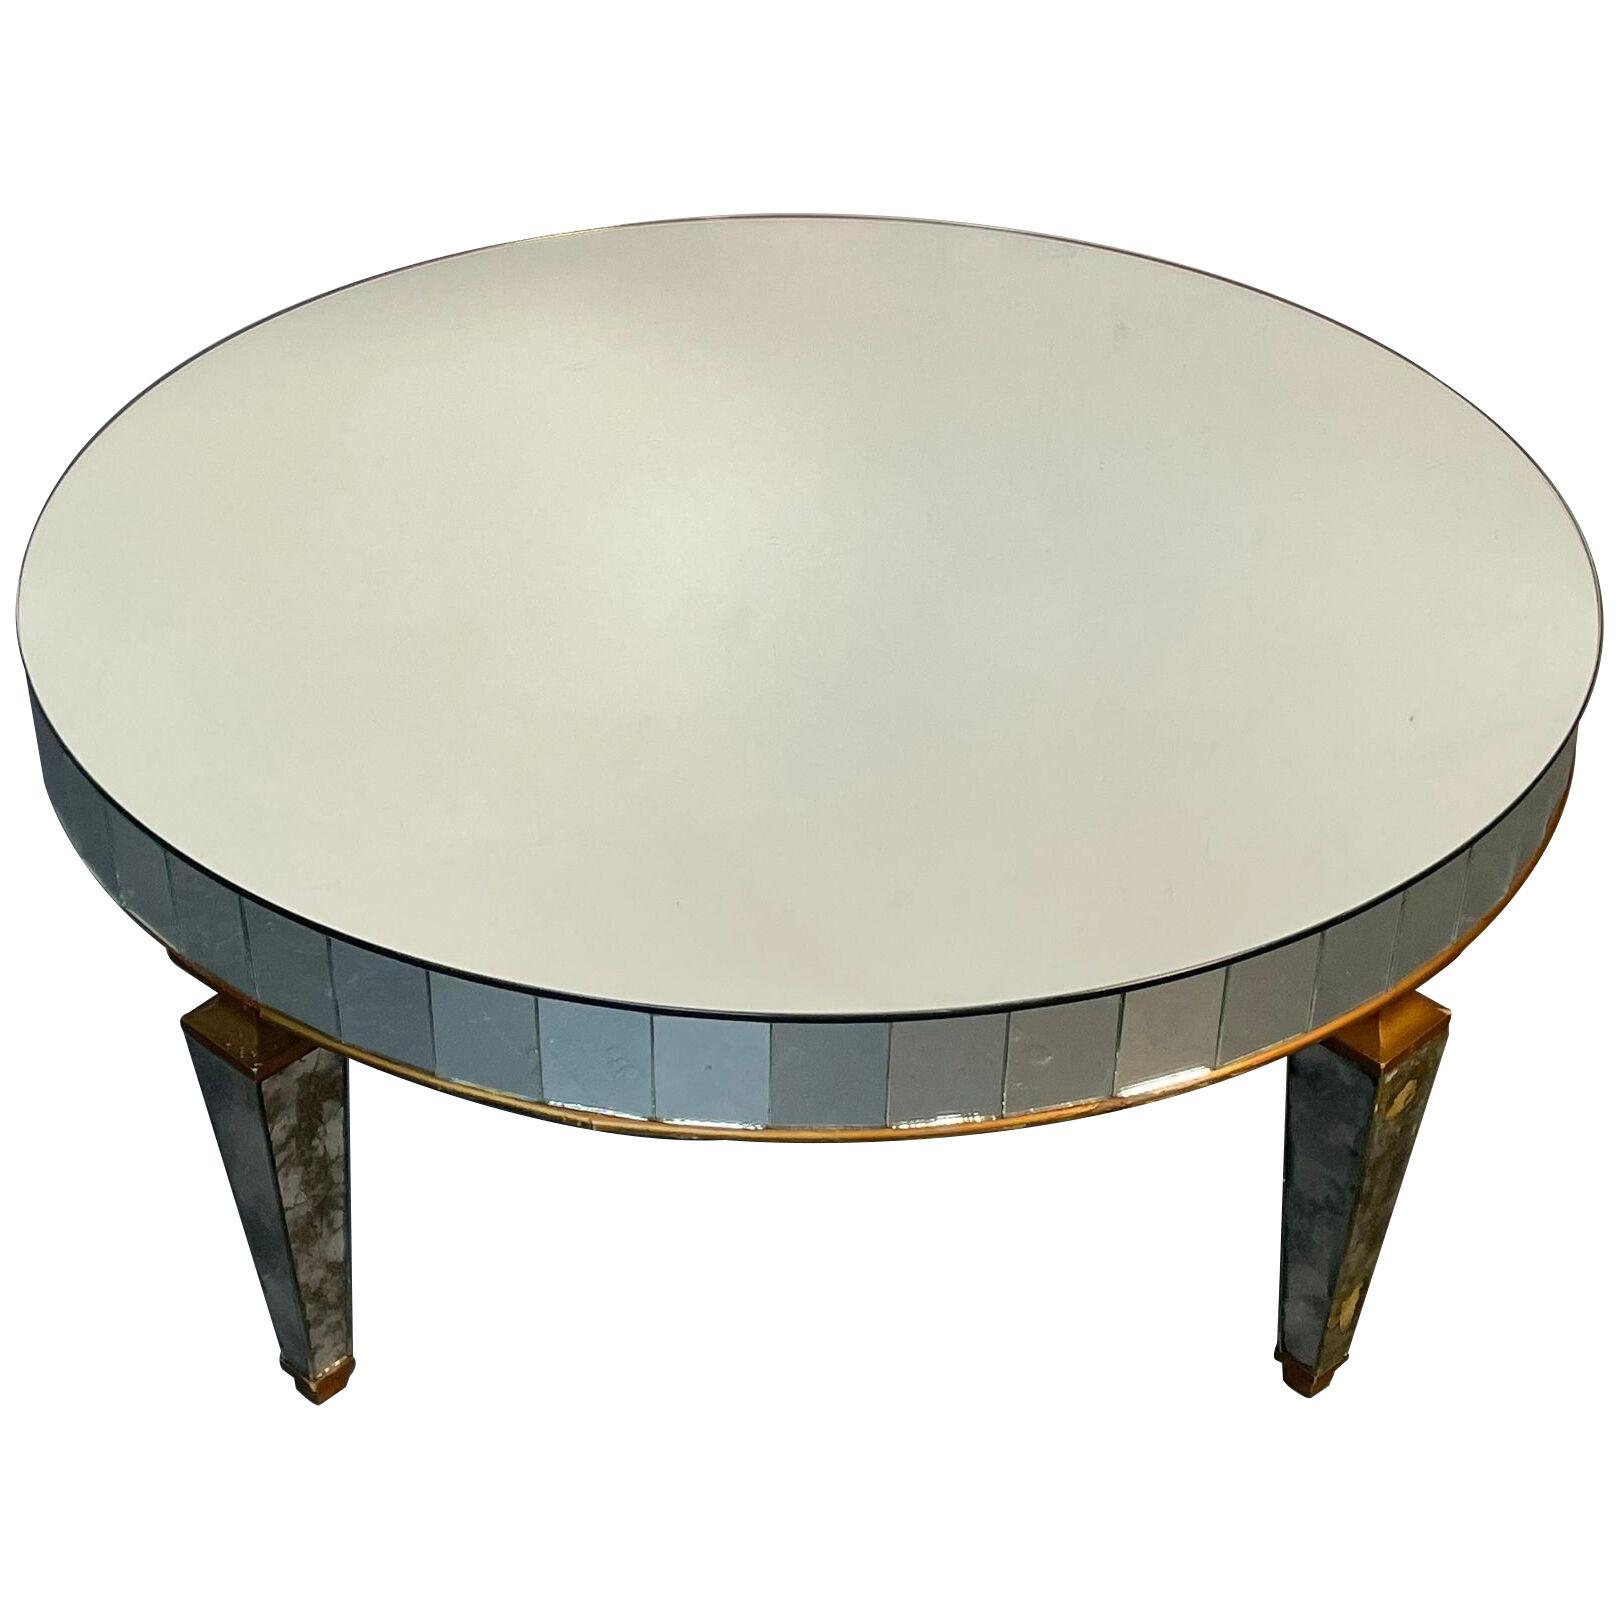 Art Deco Style Mirrored Circular Coffee / Cocktail / Low Table, Distressed